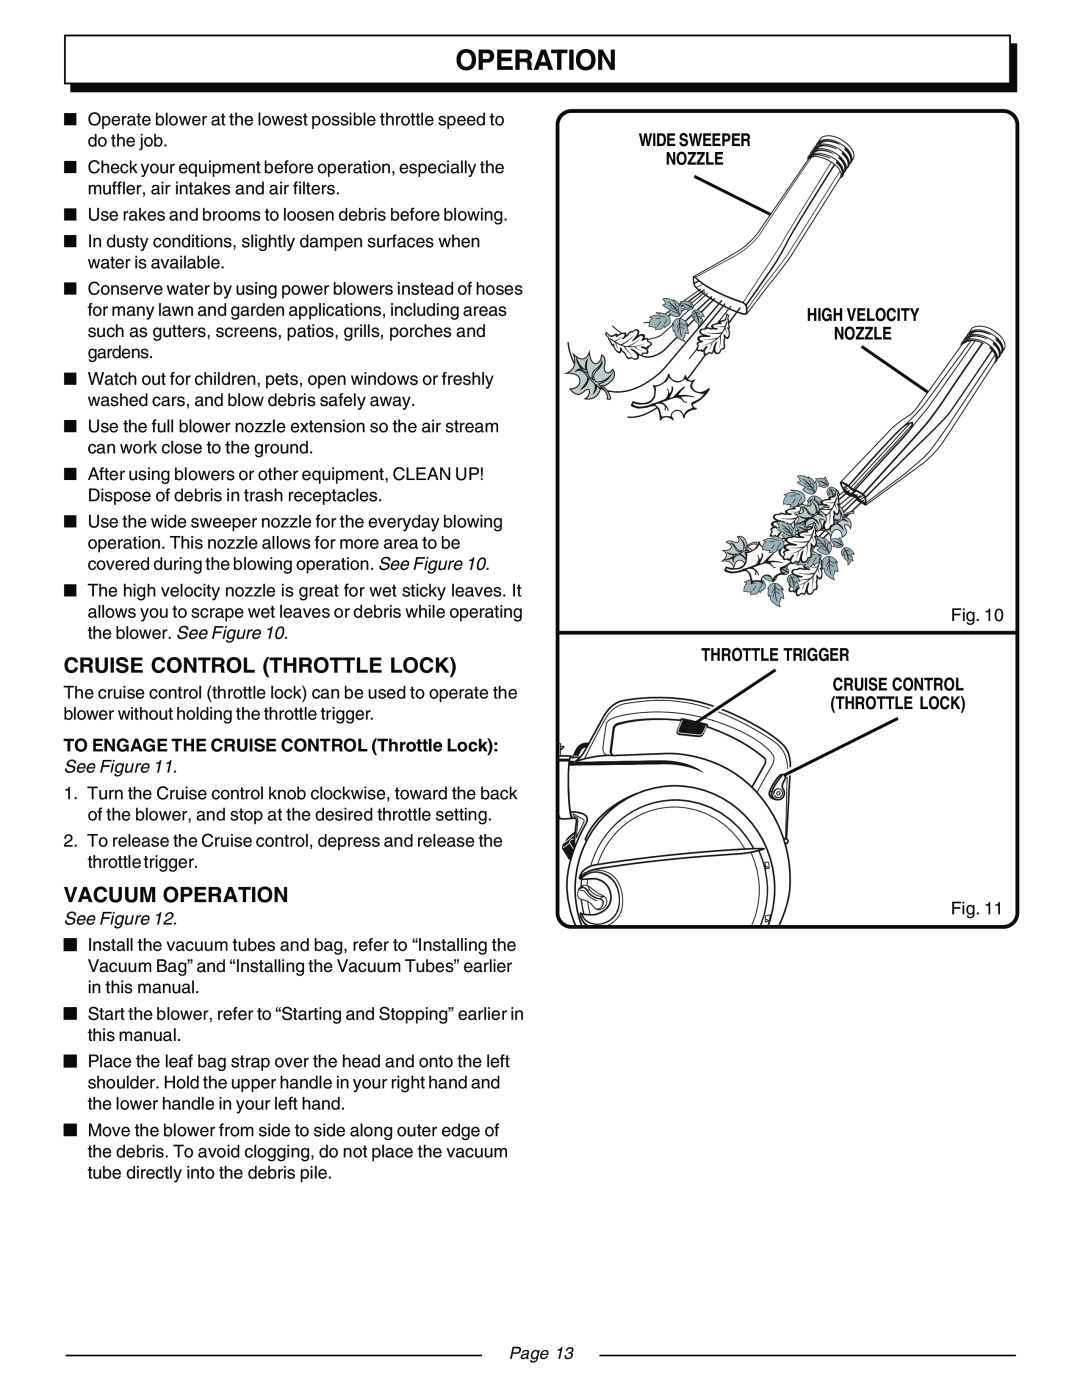 Homelite ZR08107 manual Operation, TO ENGAGE THE CRUISE CONTROL Throttle Lock, See Figure, Throttle Trigger, Page 